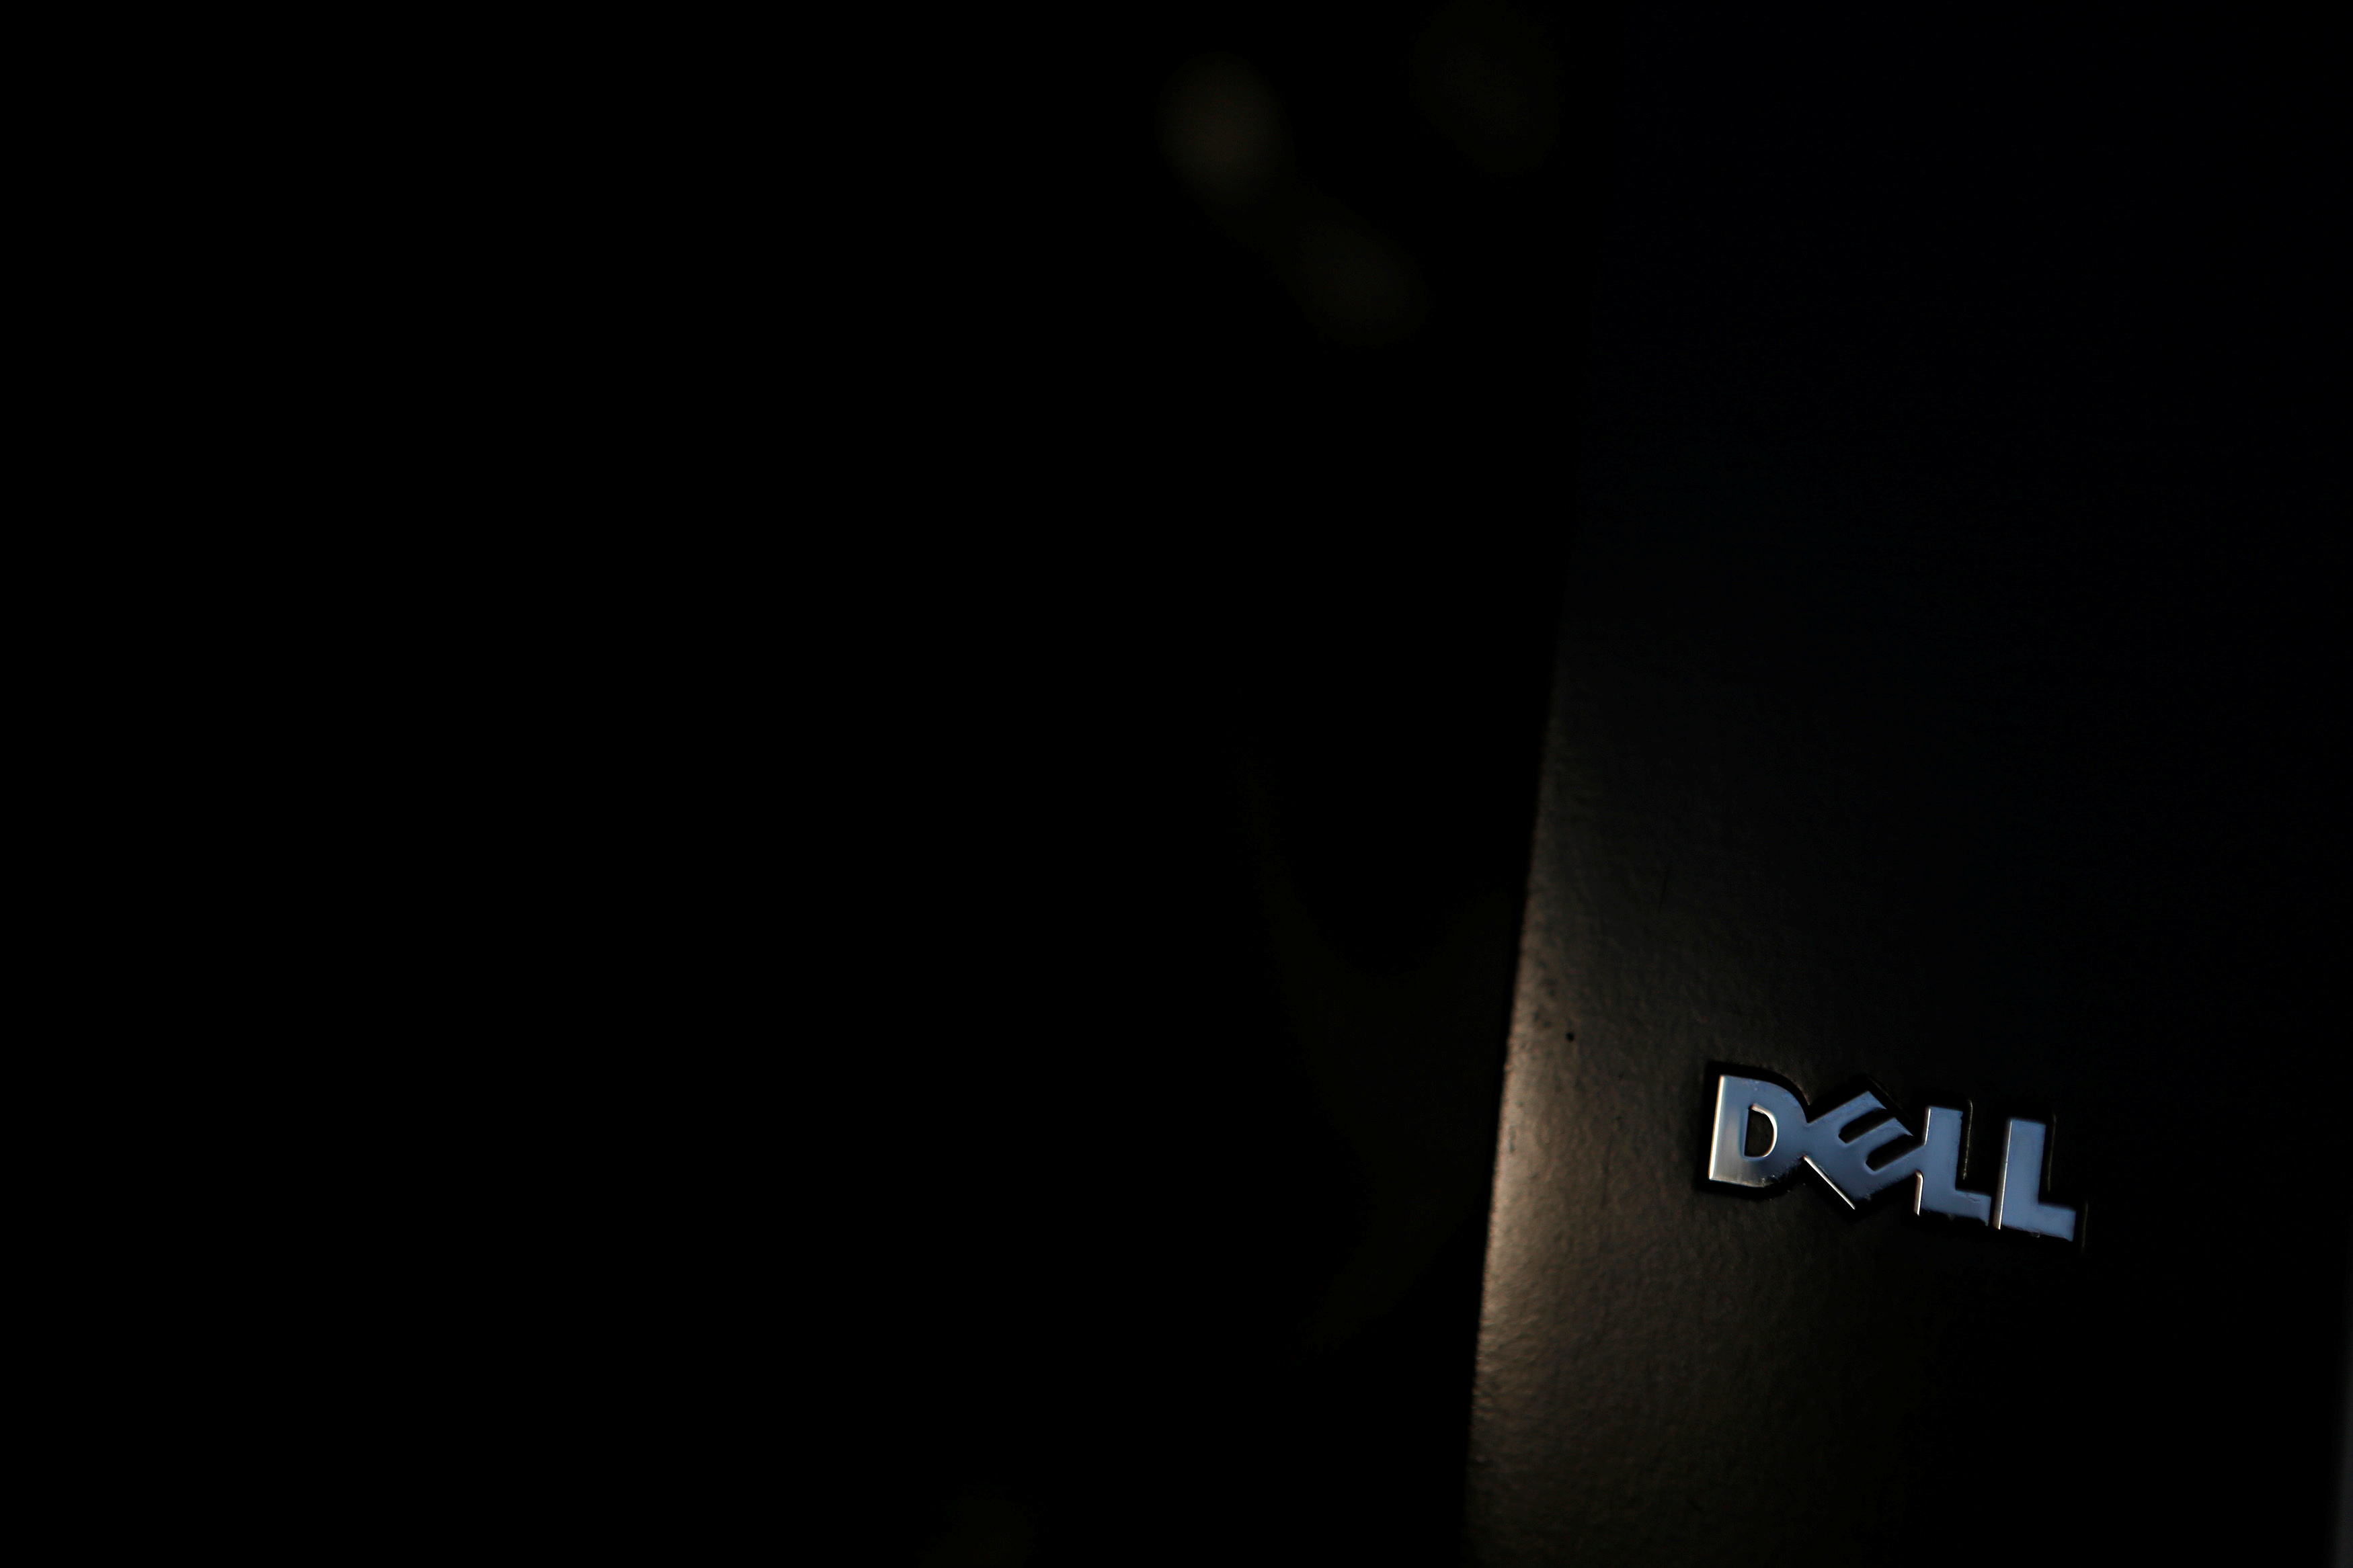 The logo of a Dell laptop computer is pictured in Pasadena, California July 17, 2013. REUTERS/Mario Anzuoni